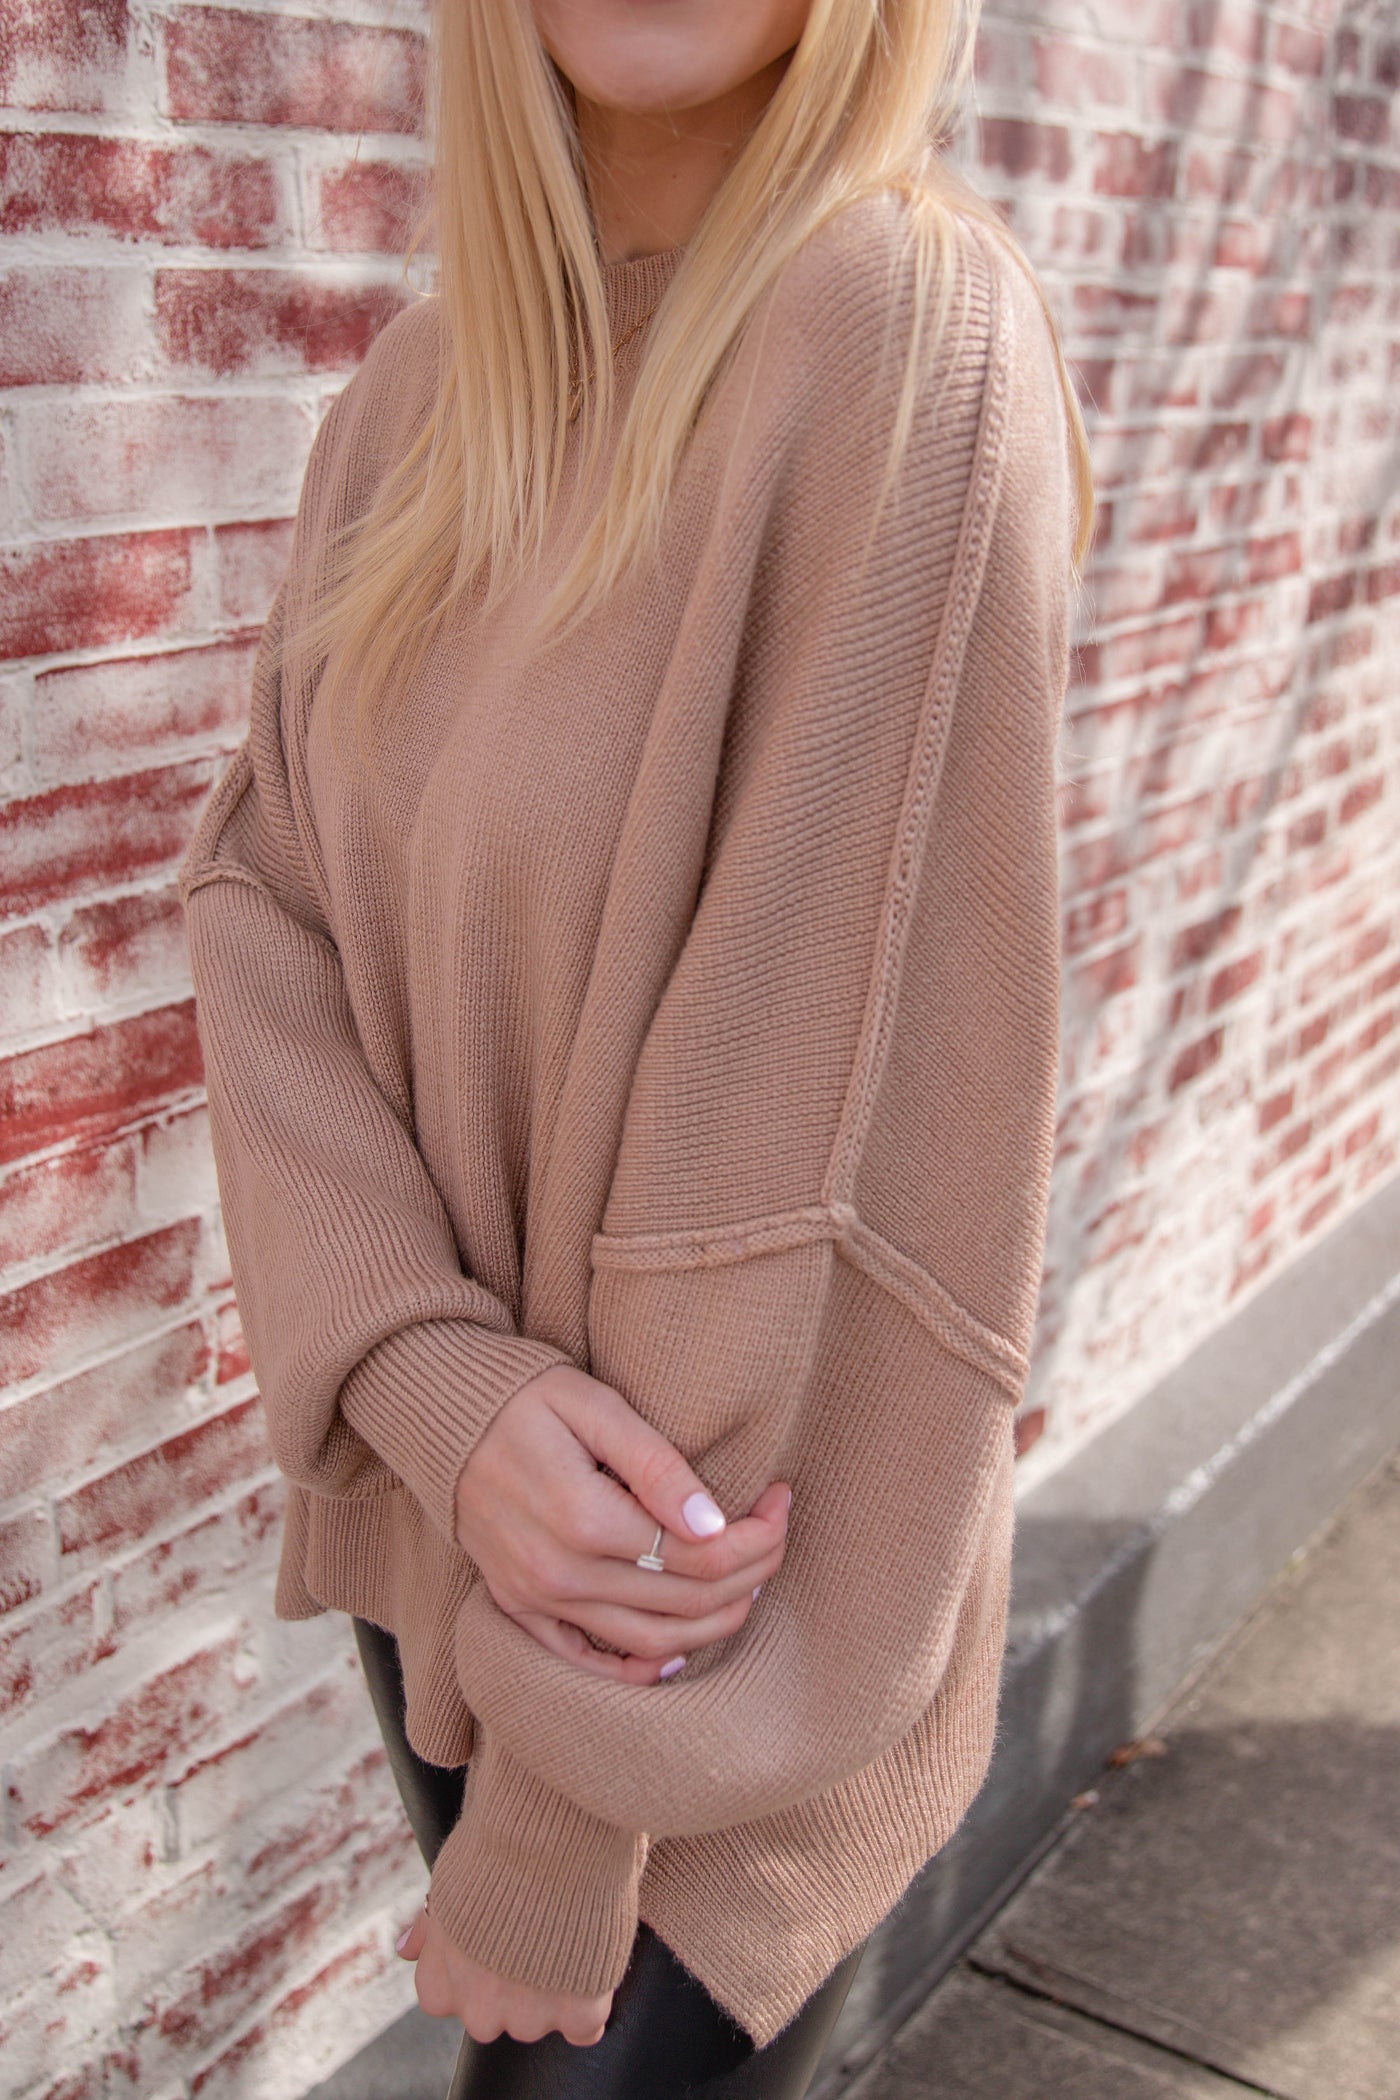 Women's Oversized Sweater- Taupe Sweater- Sweater For Leggings- Free People Sweater Dupe